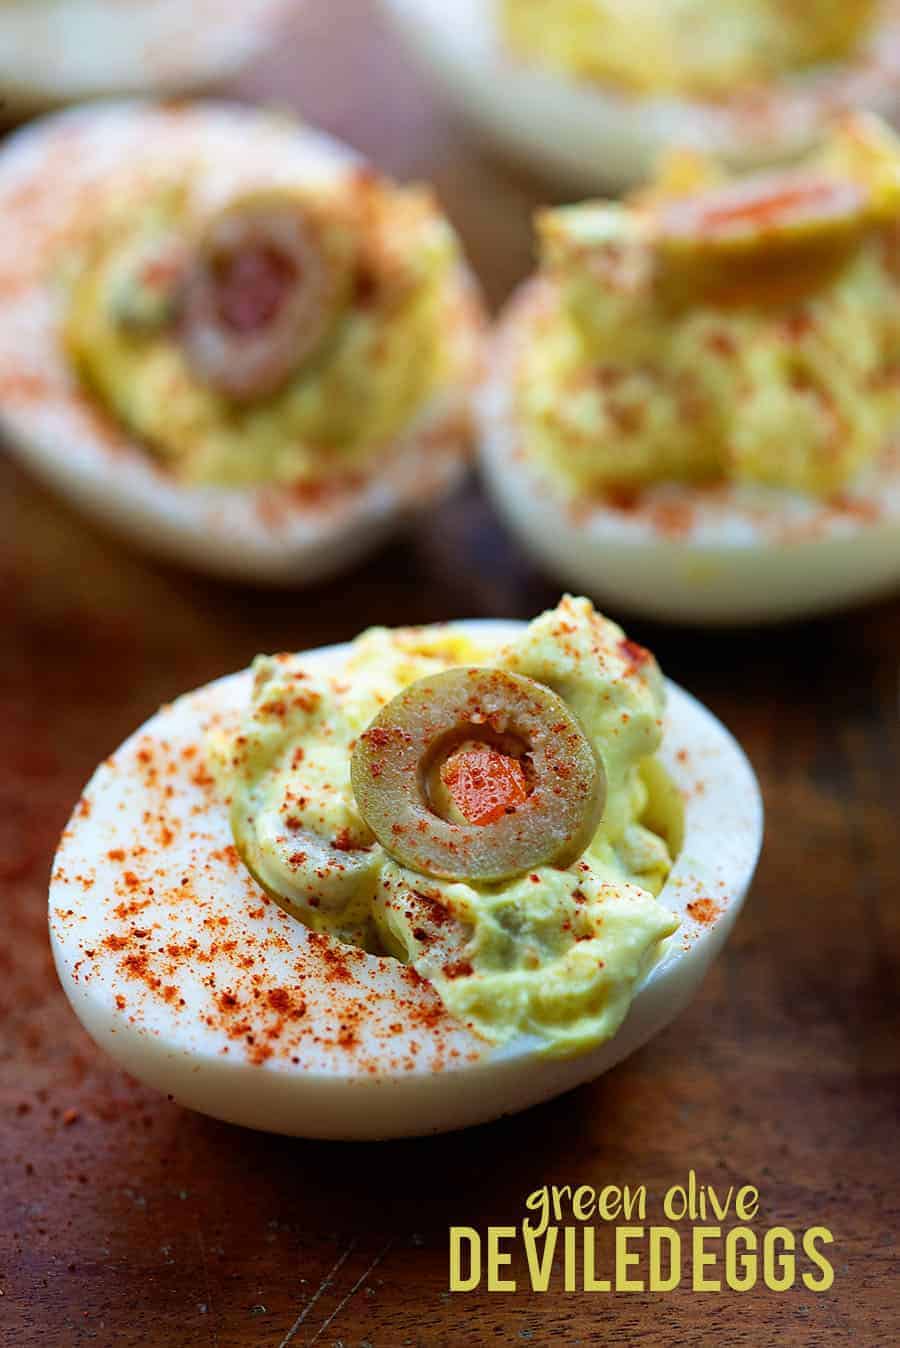 Prepared deviled eggs on a table.